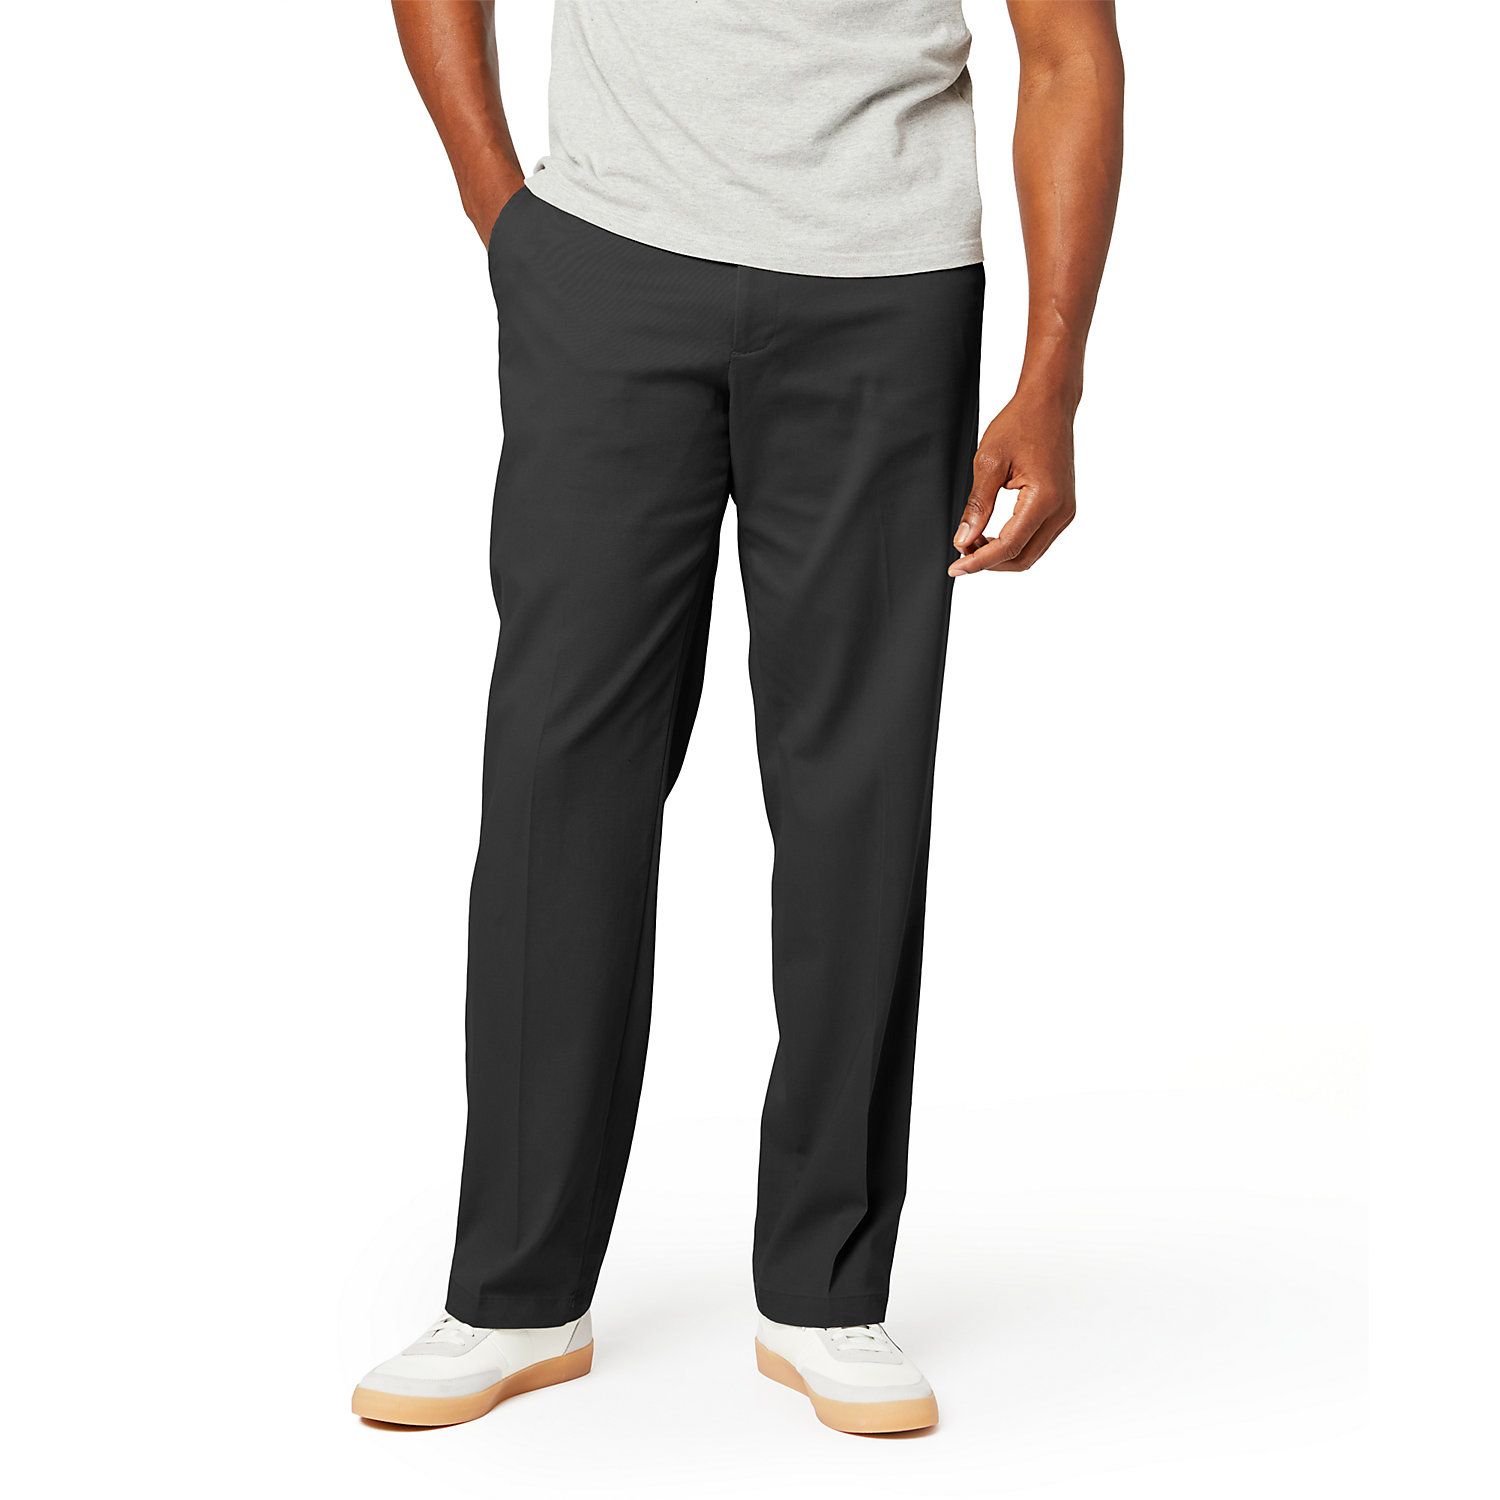 dockers men's jeans relaxed fit